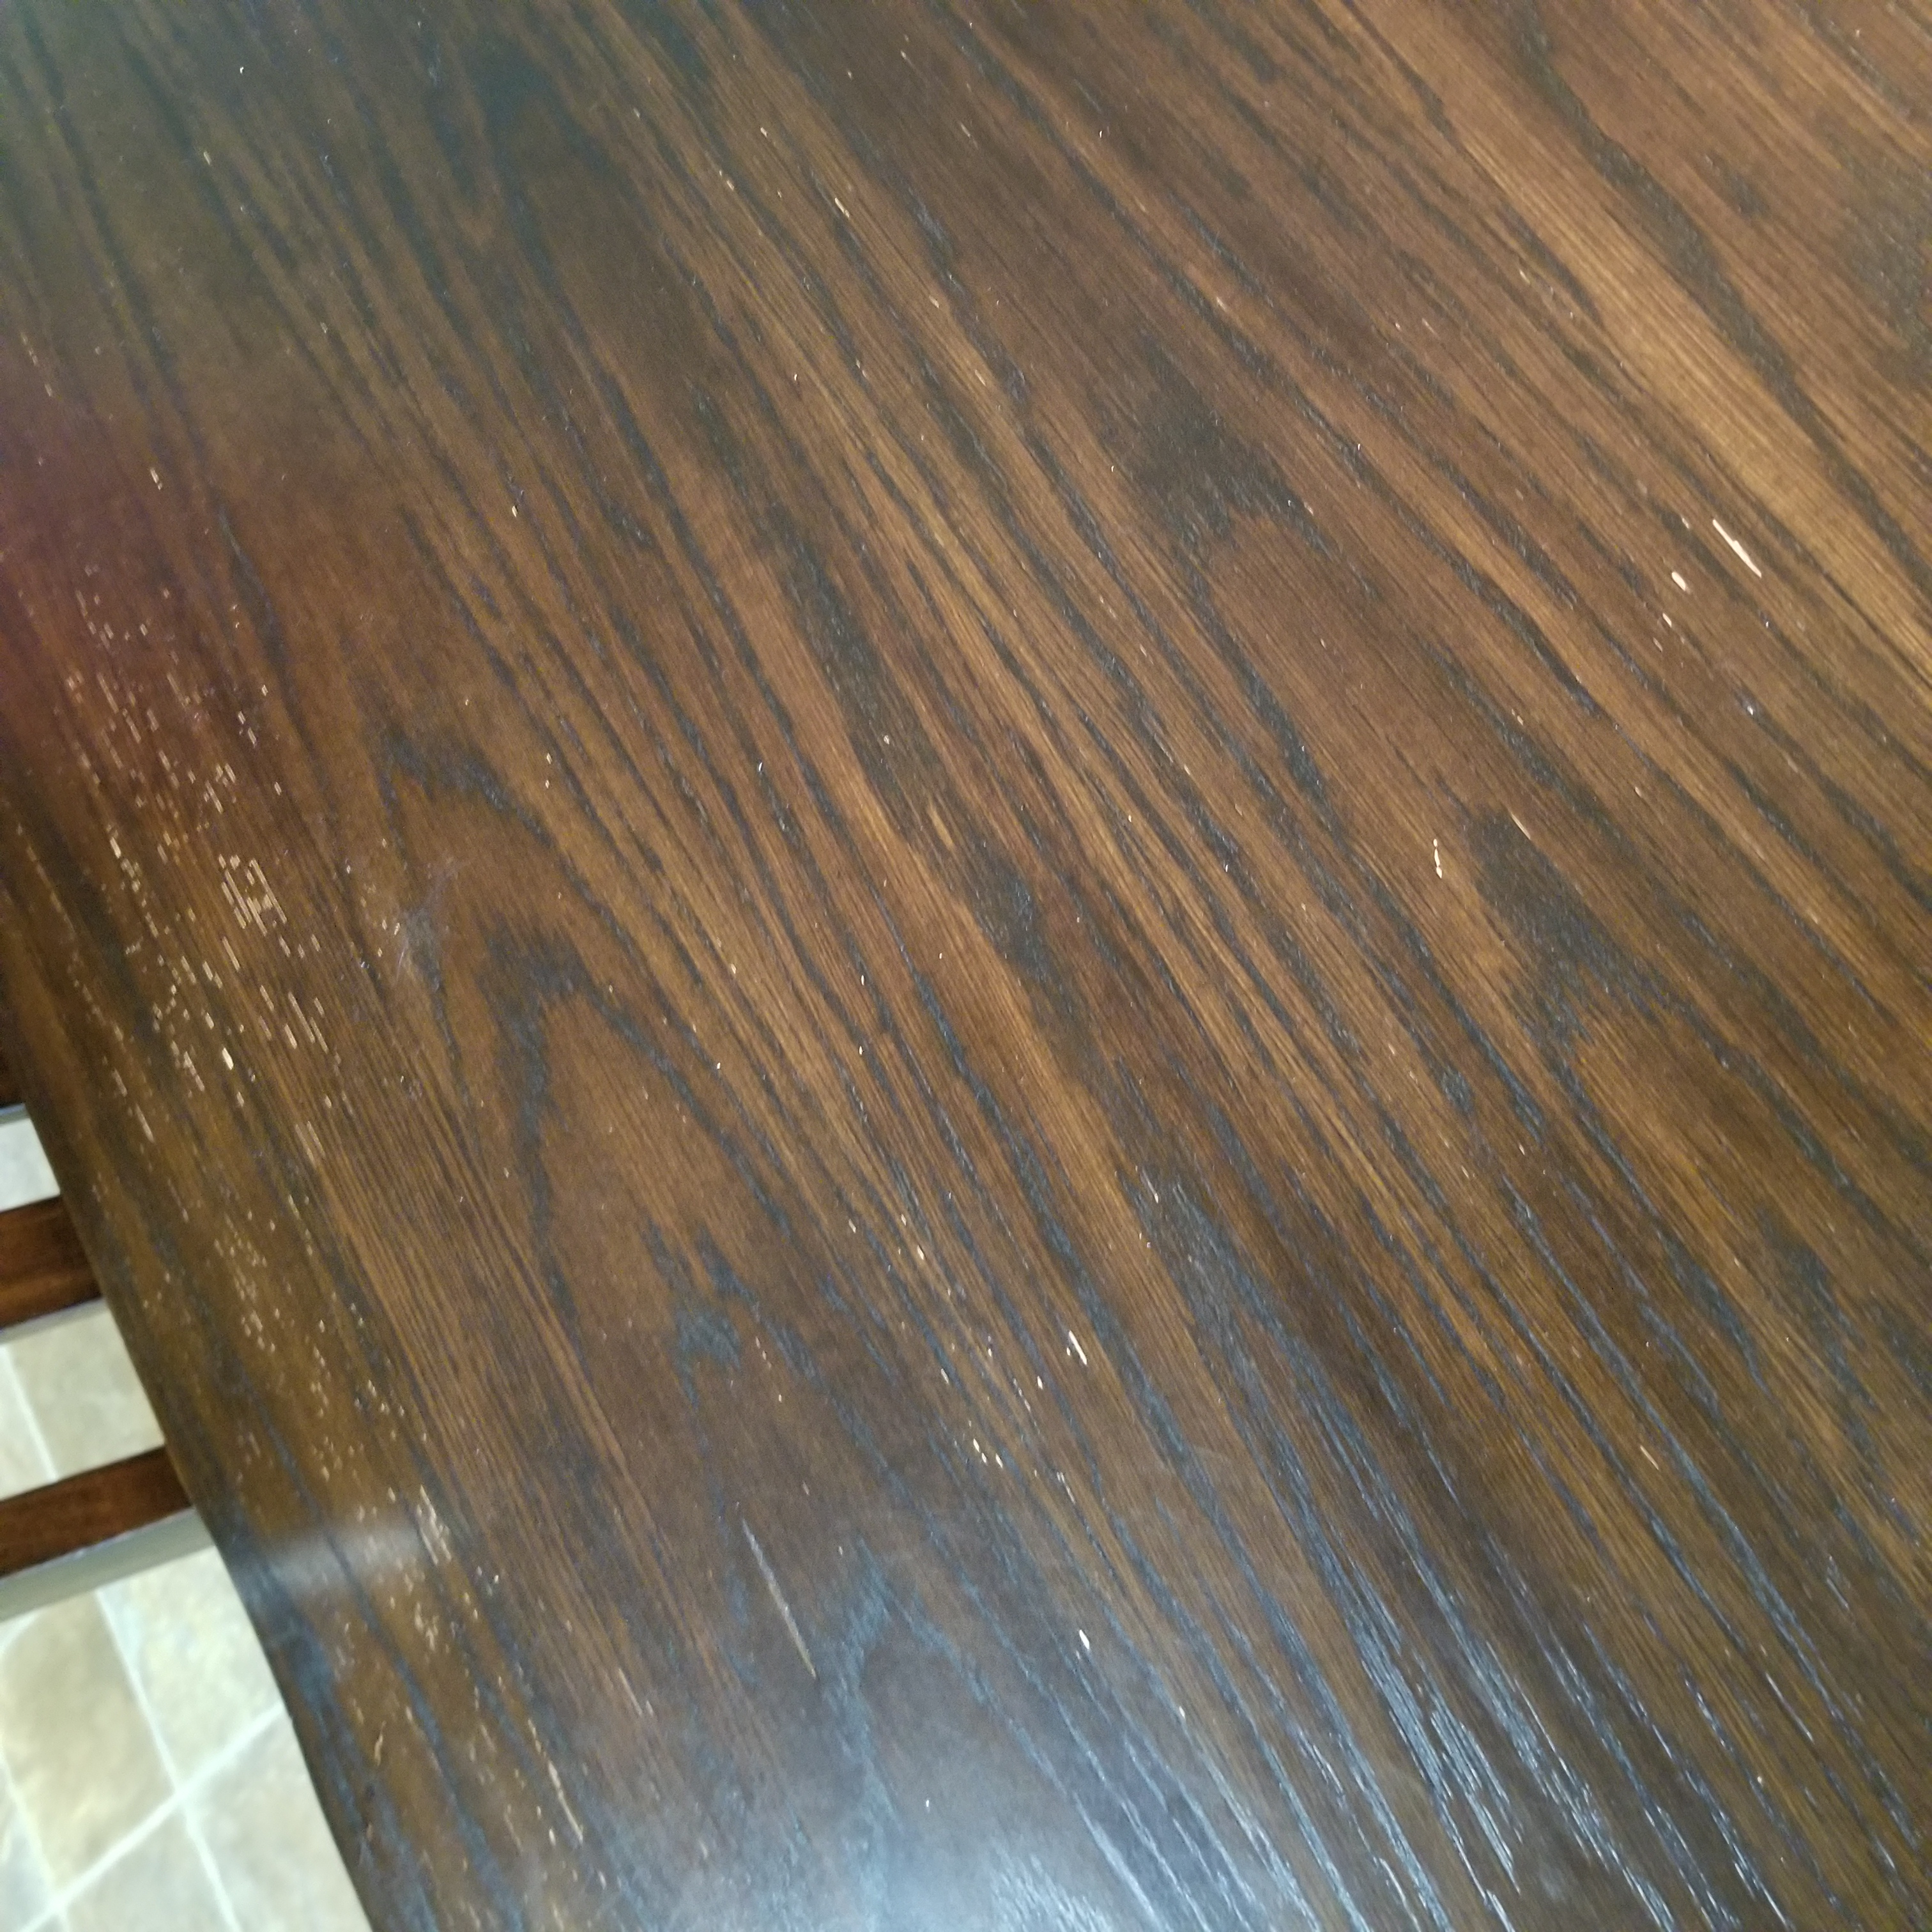 Tabletop finish wearing off within 2 months